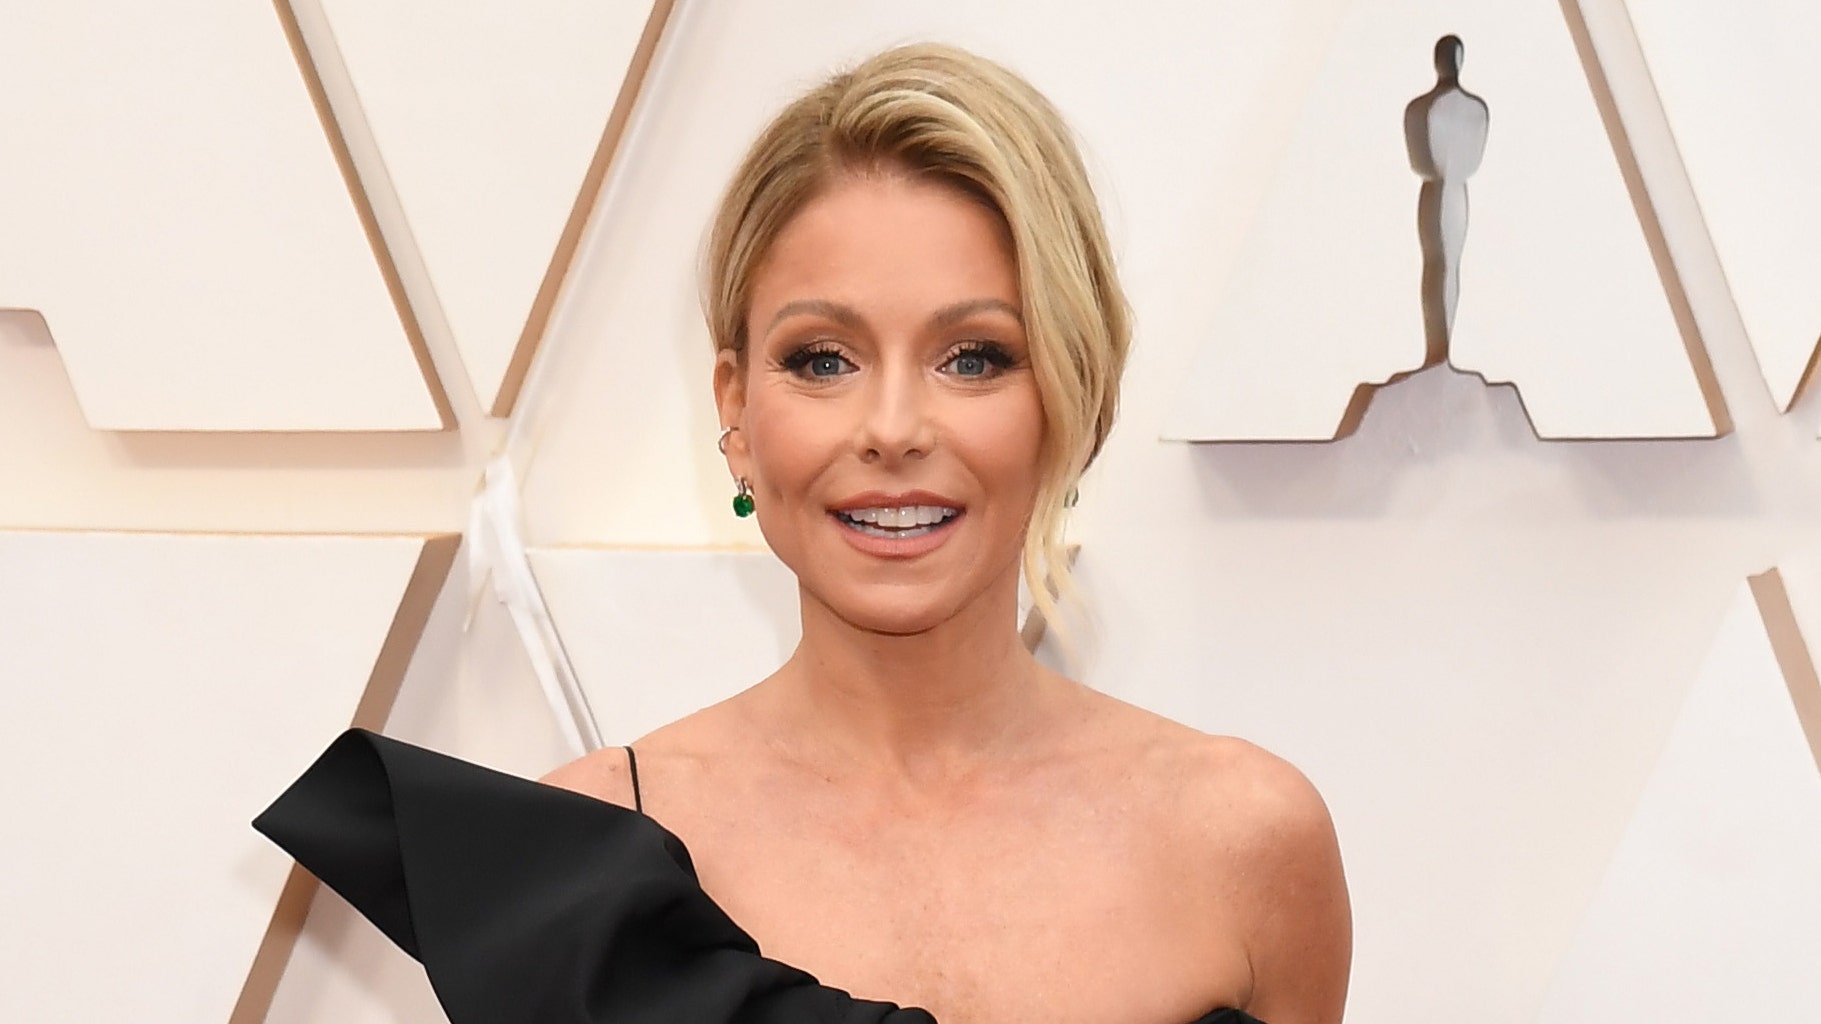 Kelly Ripa Stuns At Oscars In Black Gown Pokes Fun At Past Red Carpet